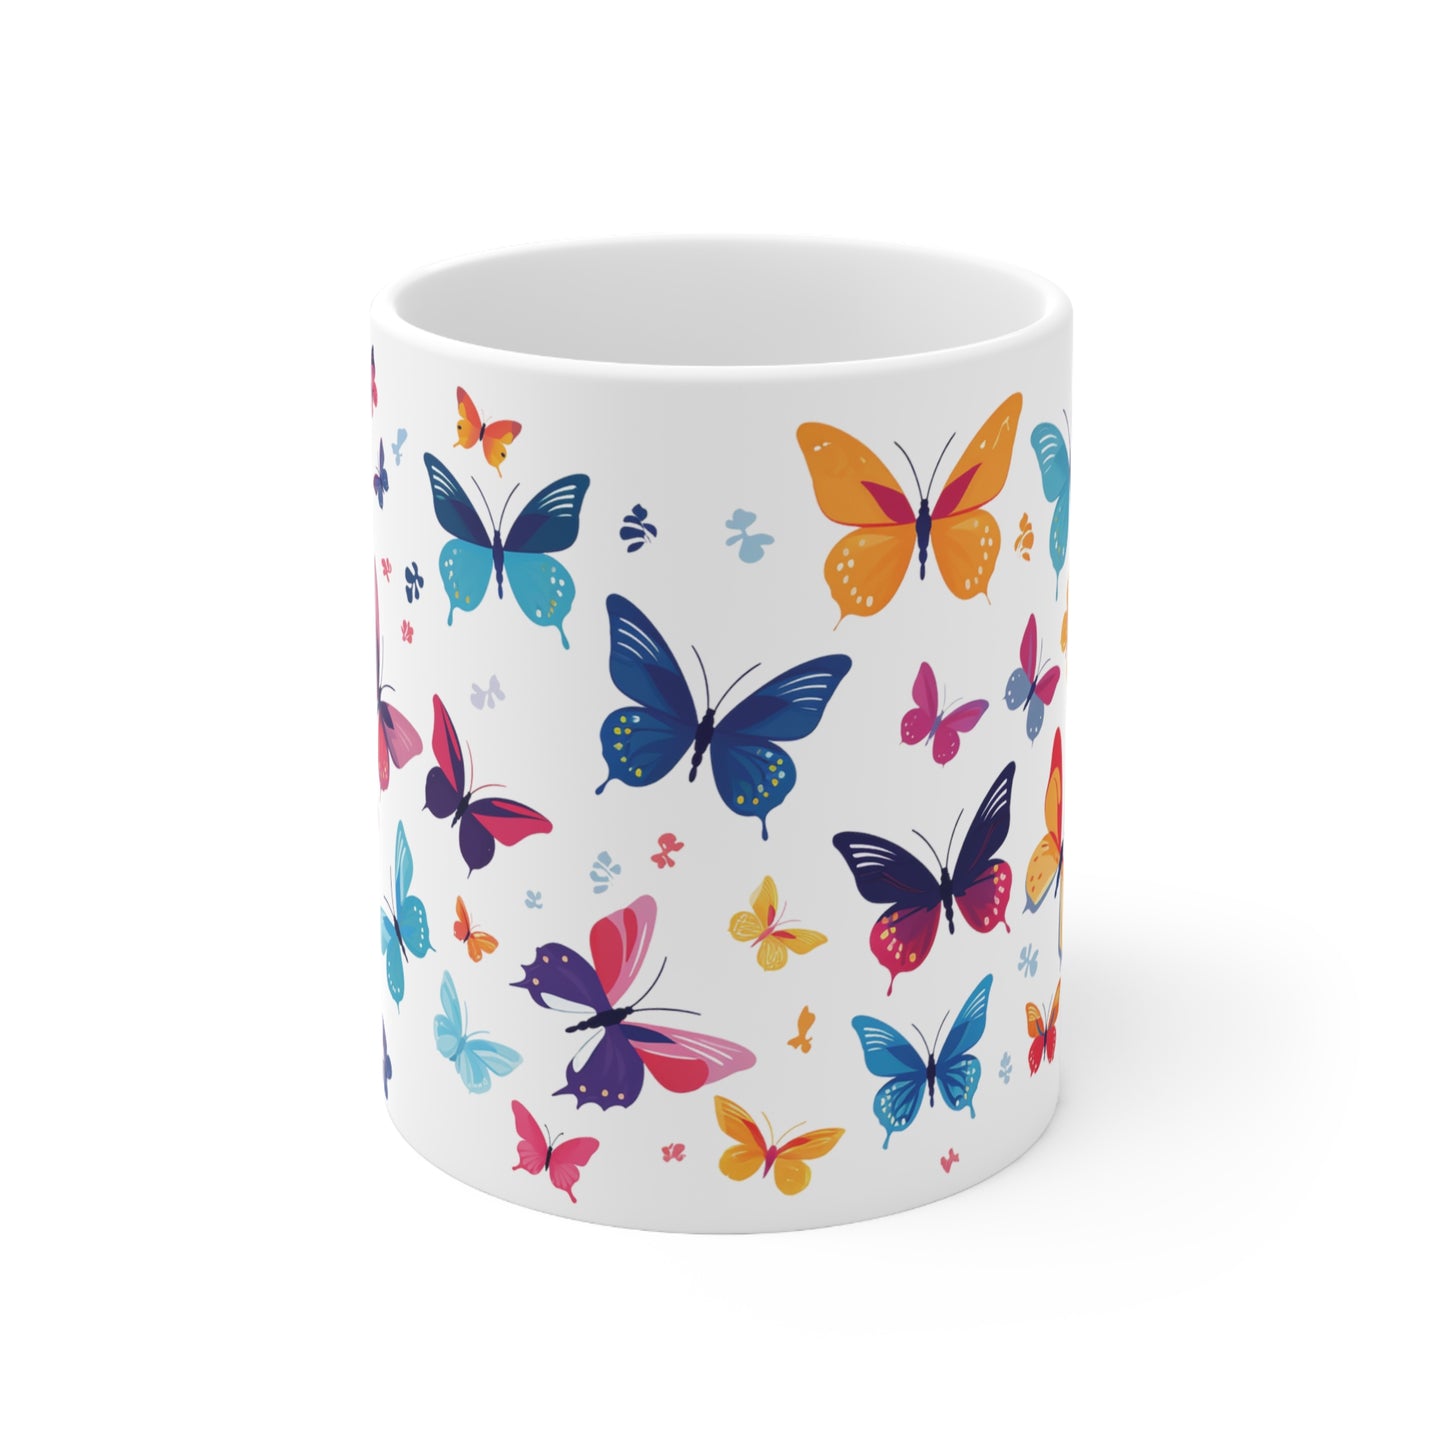 Butterfly Mug, Colorful Butterfly Tea Cup, Mother's Day Gift, Butterfly Pattern Mug, Butterfly Lover Mug, Butterfly Gift Idea, Gift for her